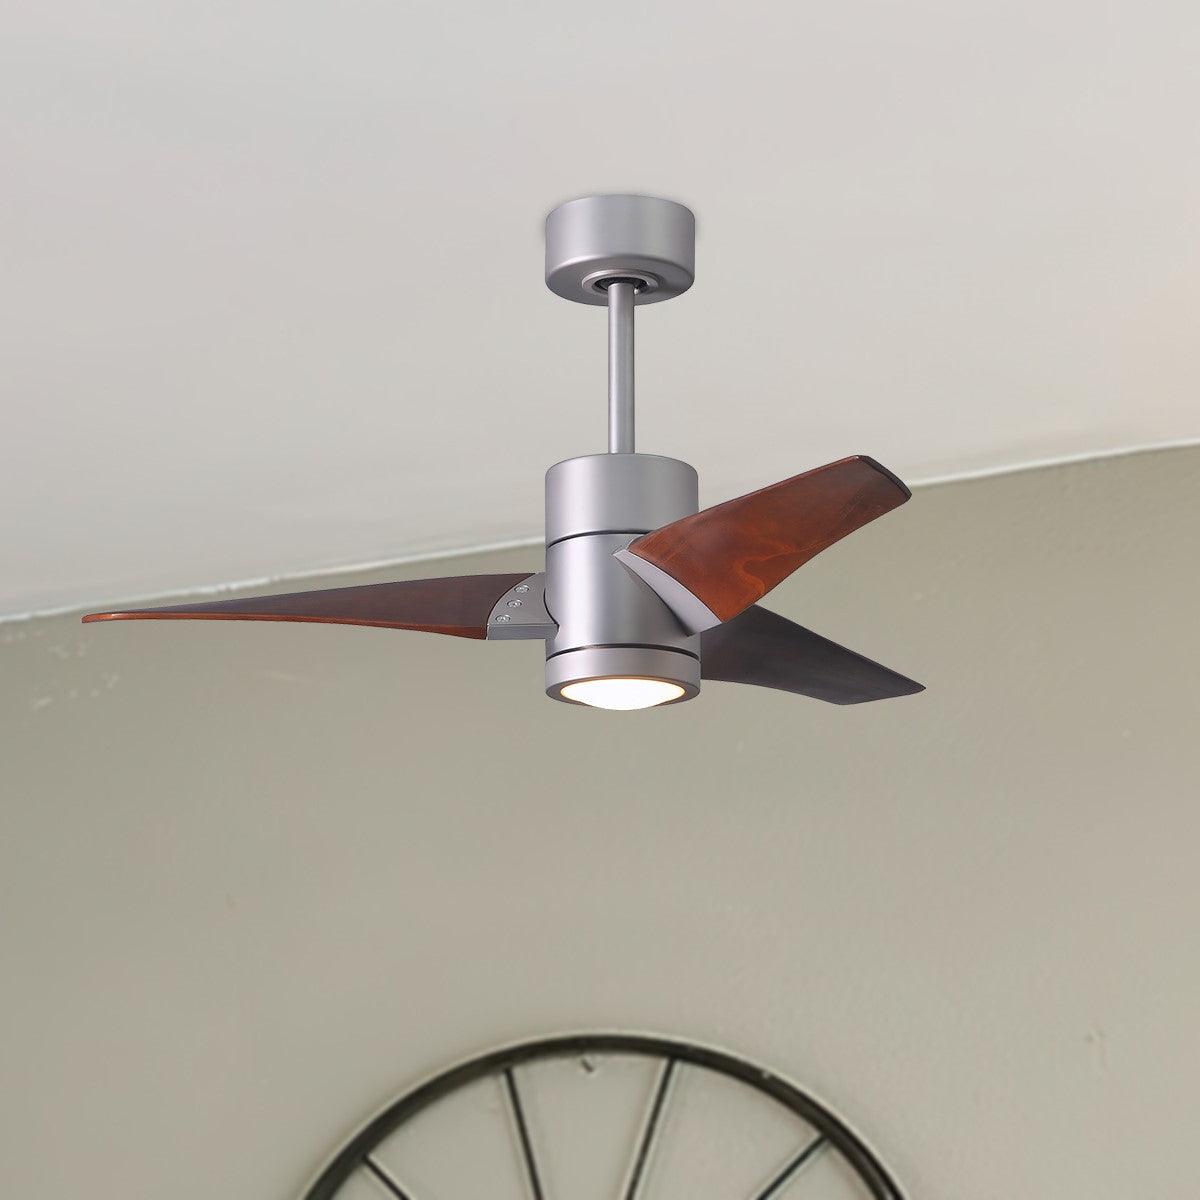 Super Janet 42 Inch Outdoor Ceiling Fan With Light, Wall And Remote Control Included - Bees Lighting